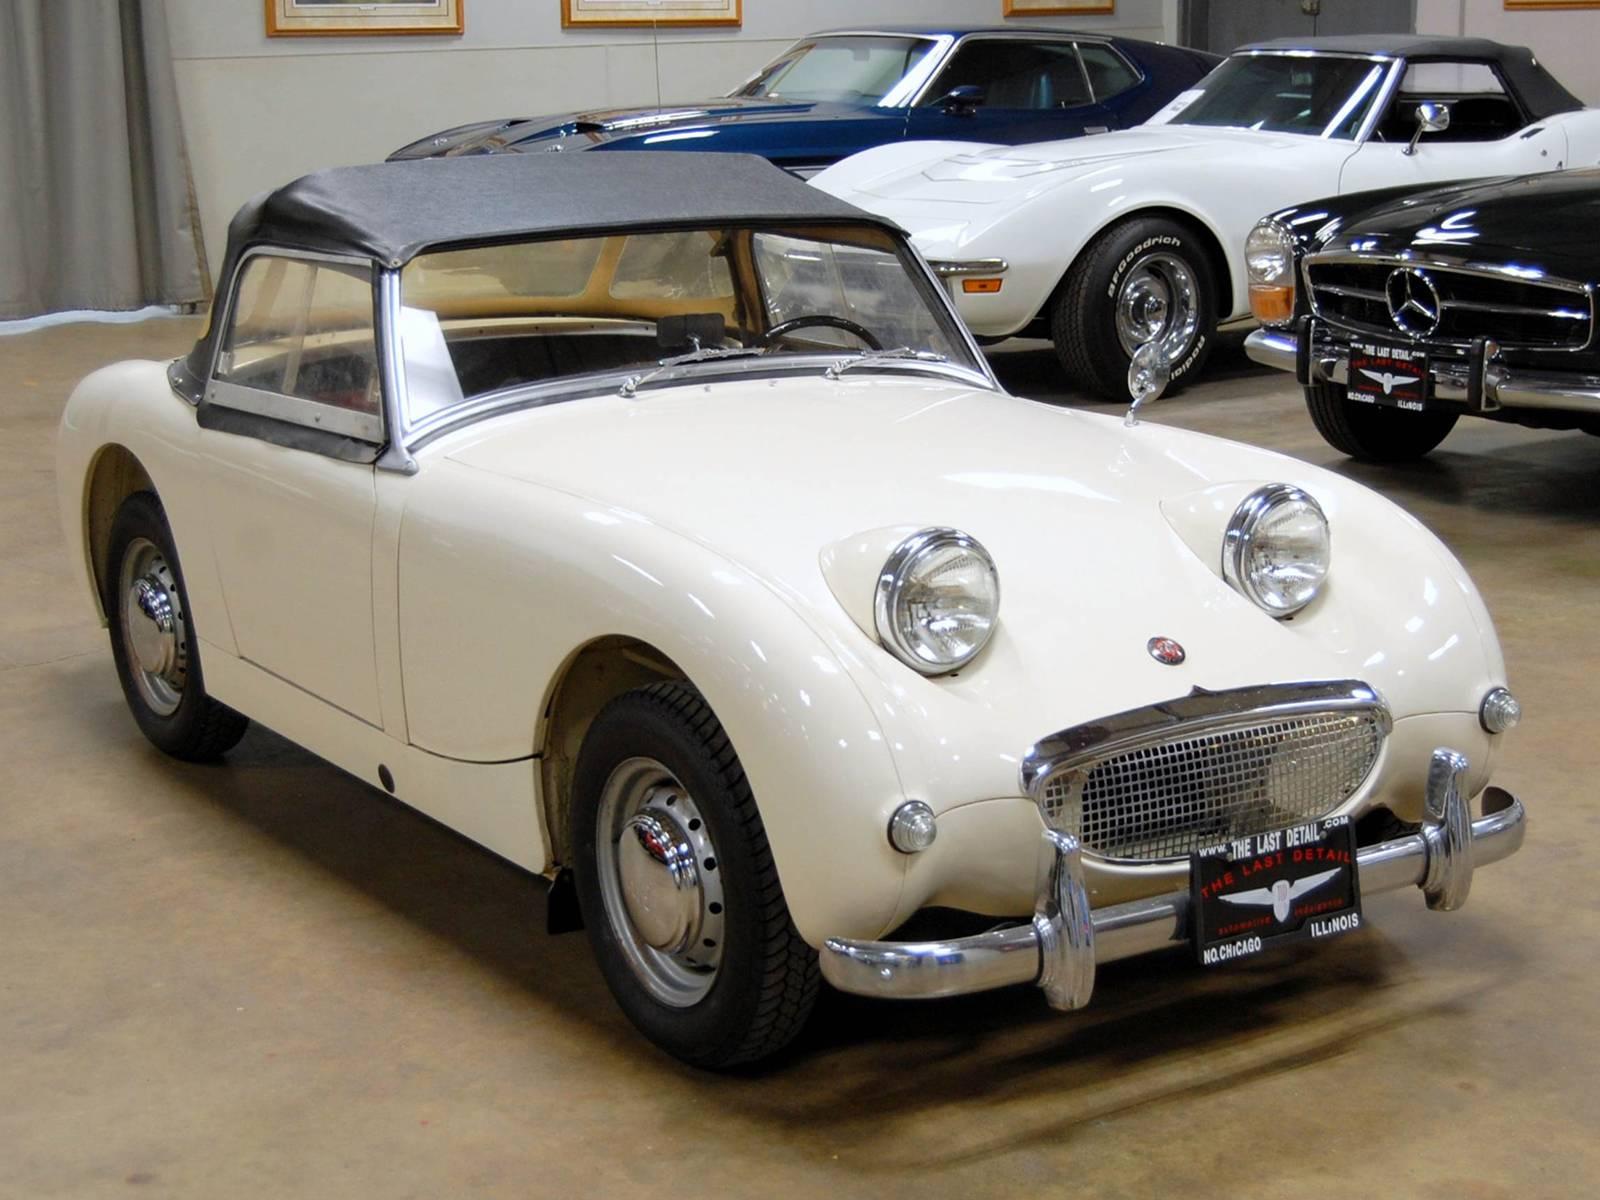 1959 Austin Healey Bug-Eye Sprite in OEW (old English white) over red upholstery with 19,398 “real” miles from new.
“Complete original Survivor,” and that can sometimes be a misnomer, because the question always is; how well did it survive and in